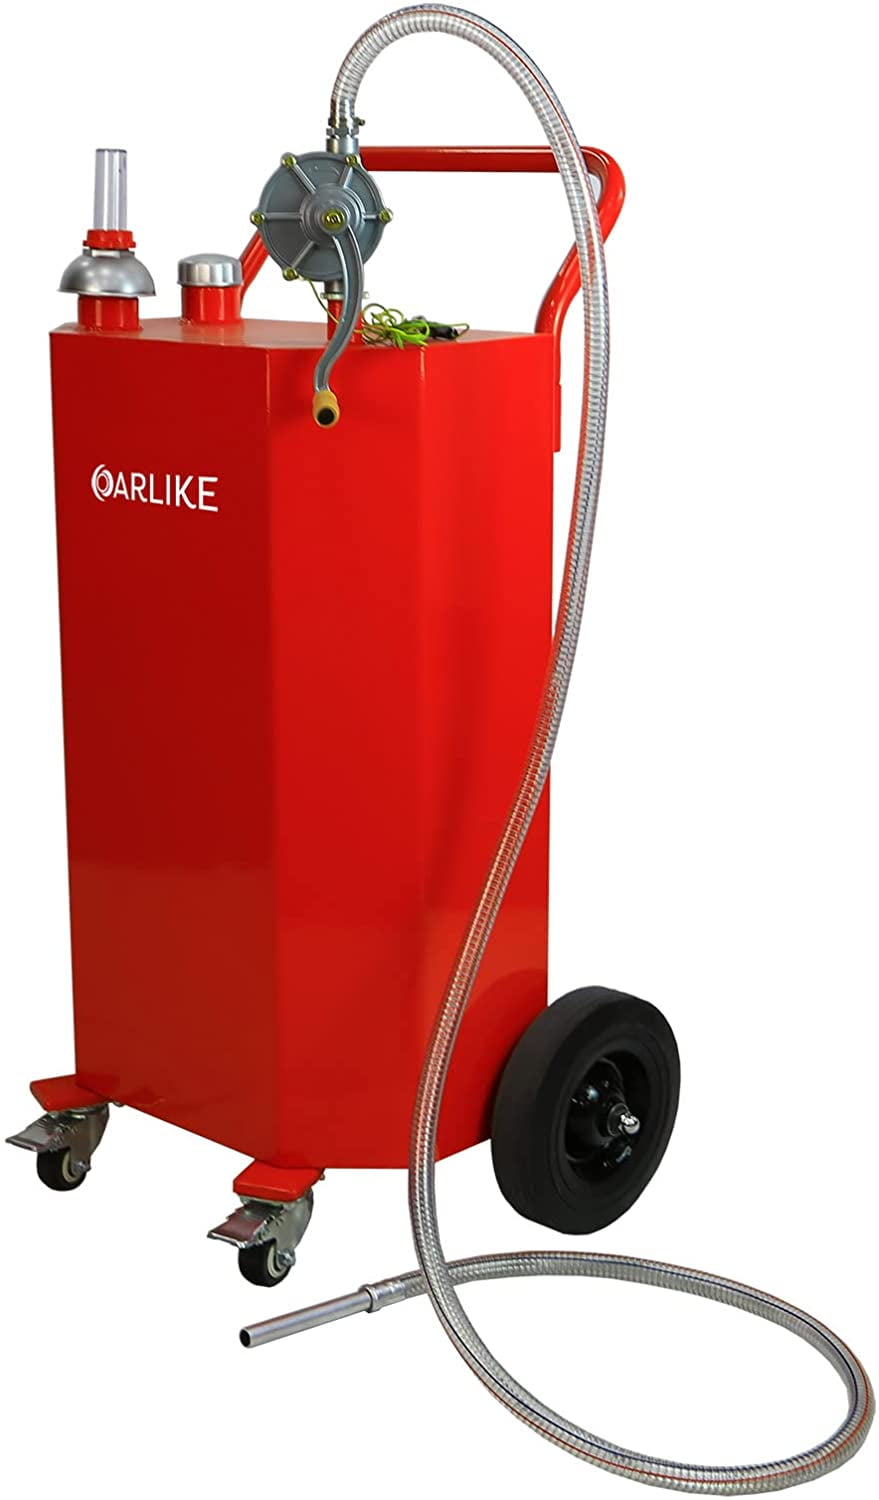 30 Gallon Gas Caddy Fuel Transfer Tank with Pump Gasoline Diesel Storage Tank Long Kink Free Hose for Car Boat ATV Red 